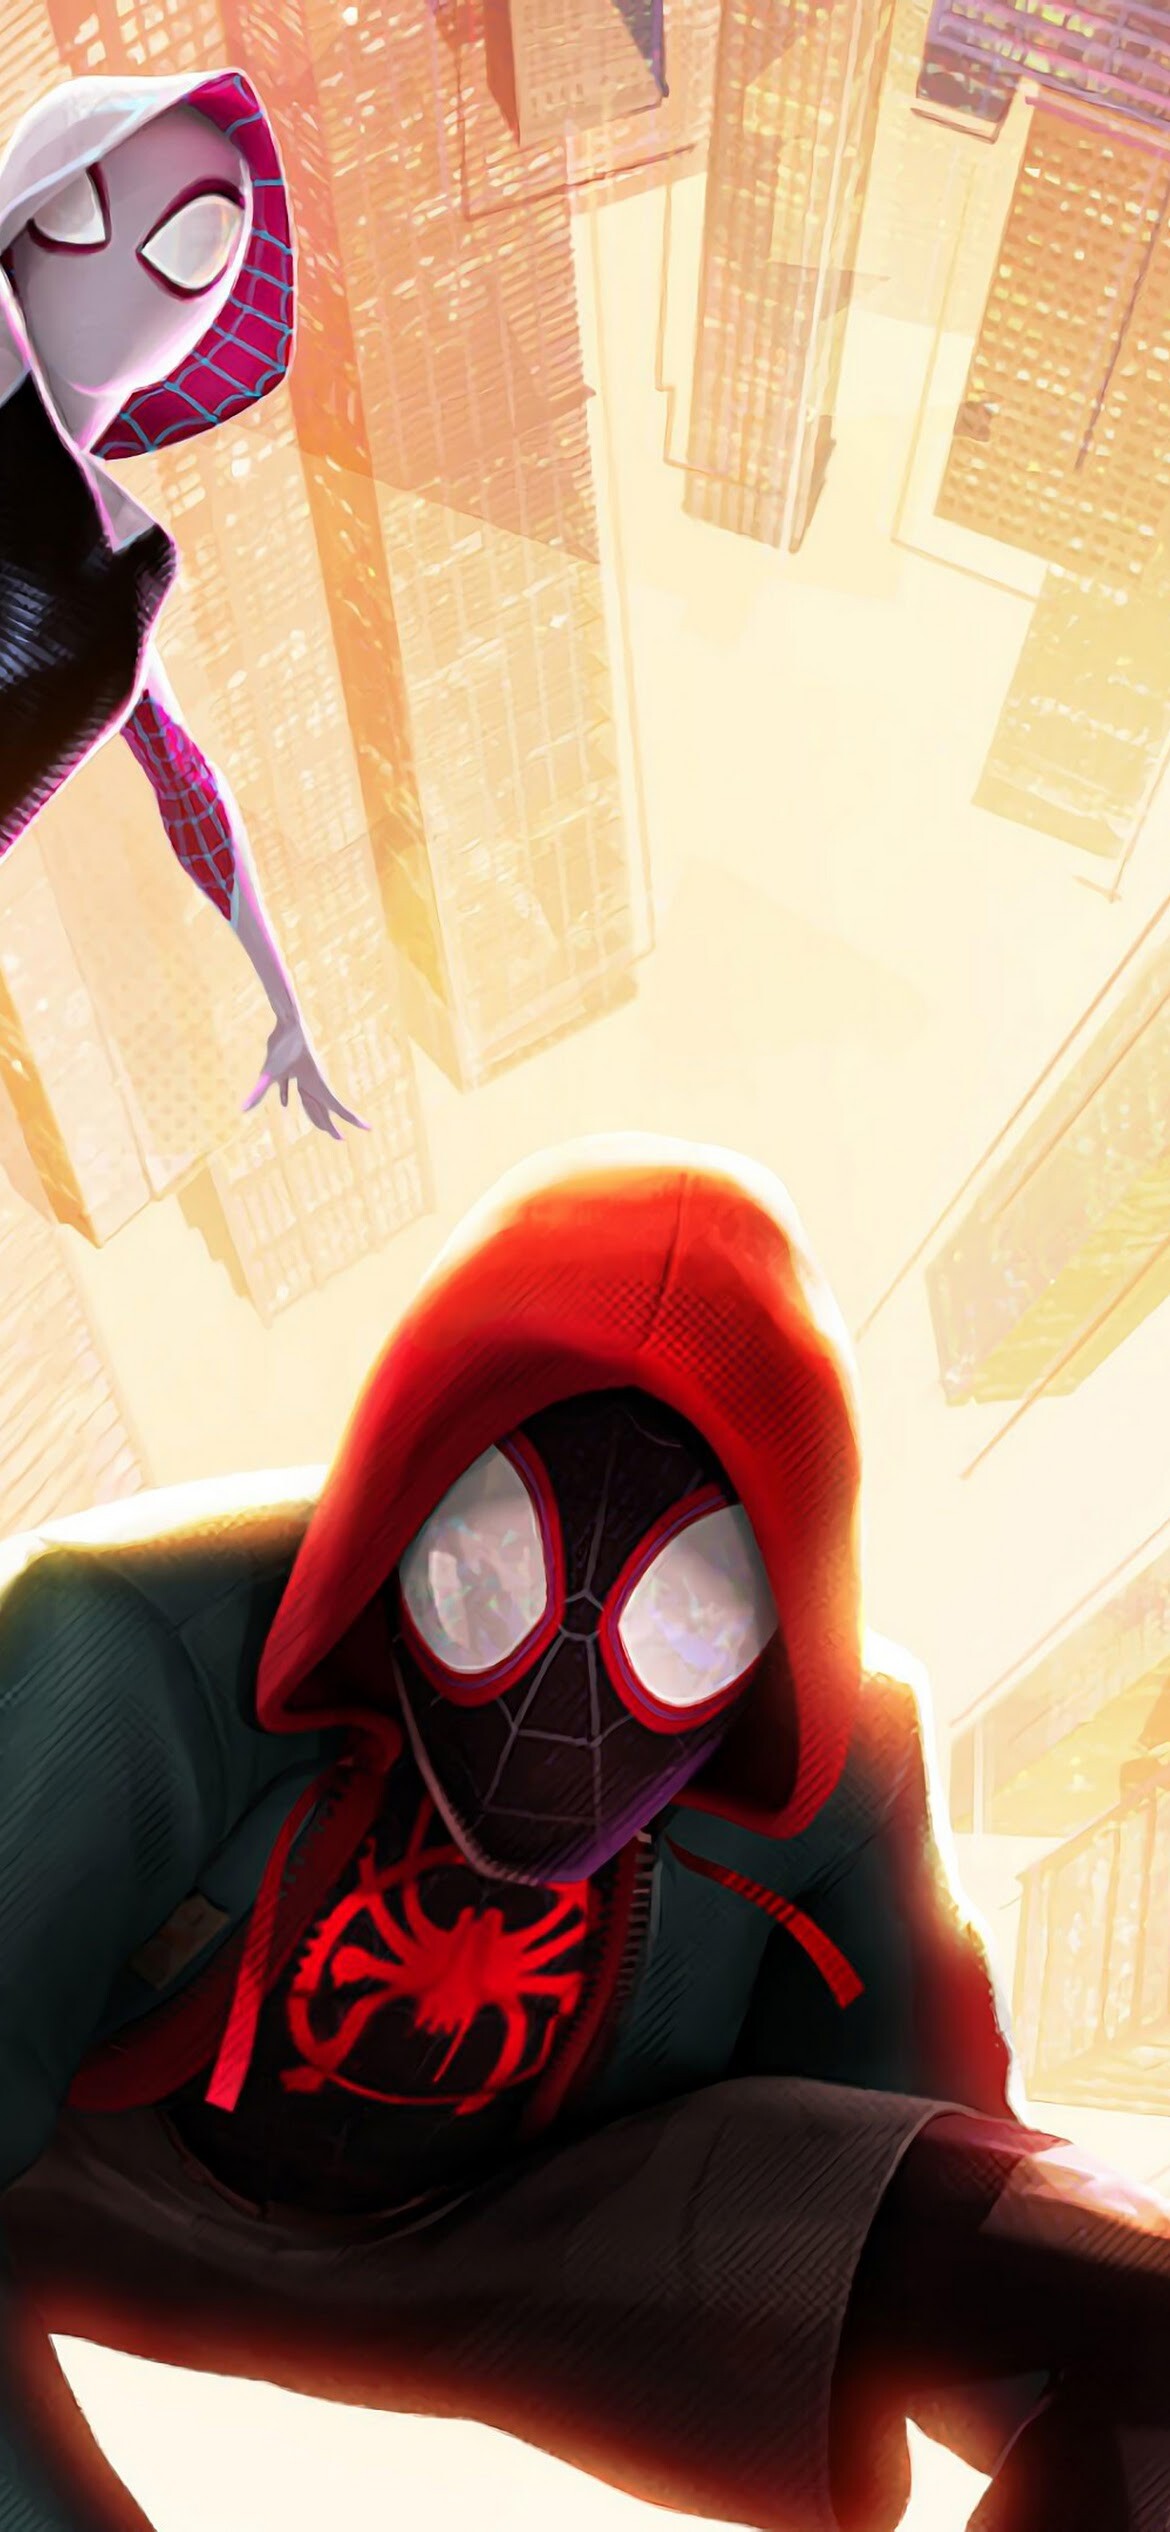 Spider-Man: Into the Spider-Verse: Won the BAFTA Award for Best Animated Film in 2019. 1170x2540 HD Wallpaper.